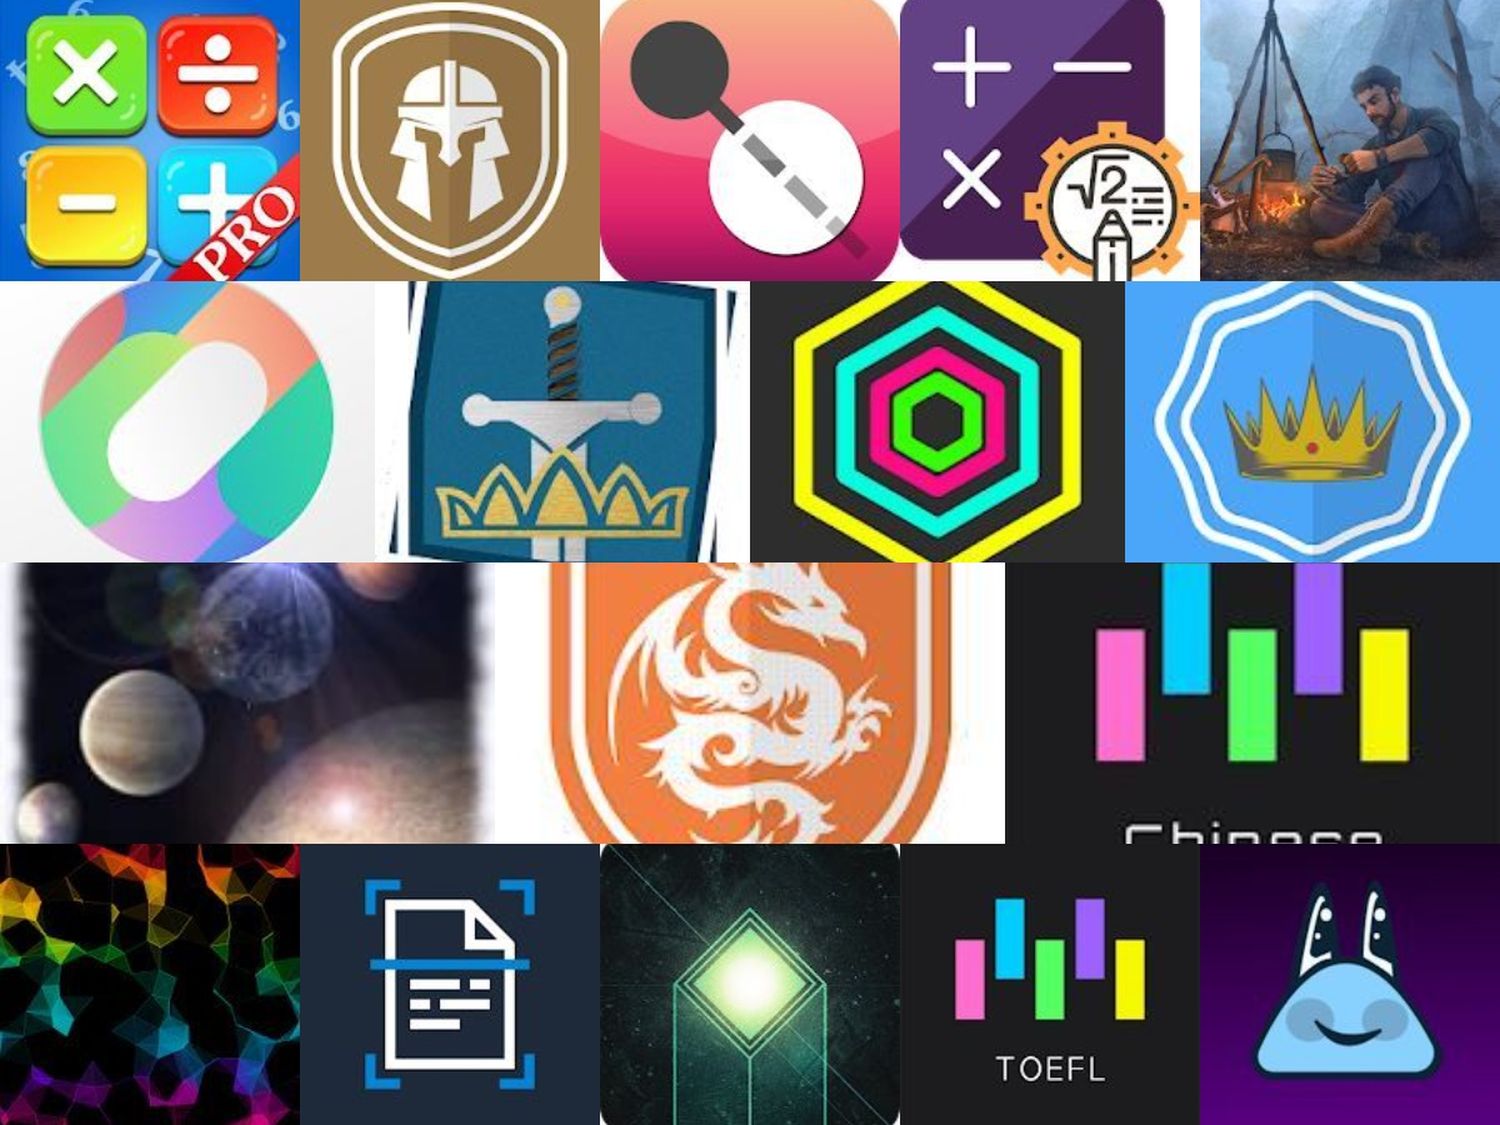 apps 03.03.2022